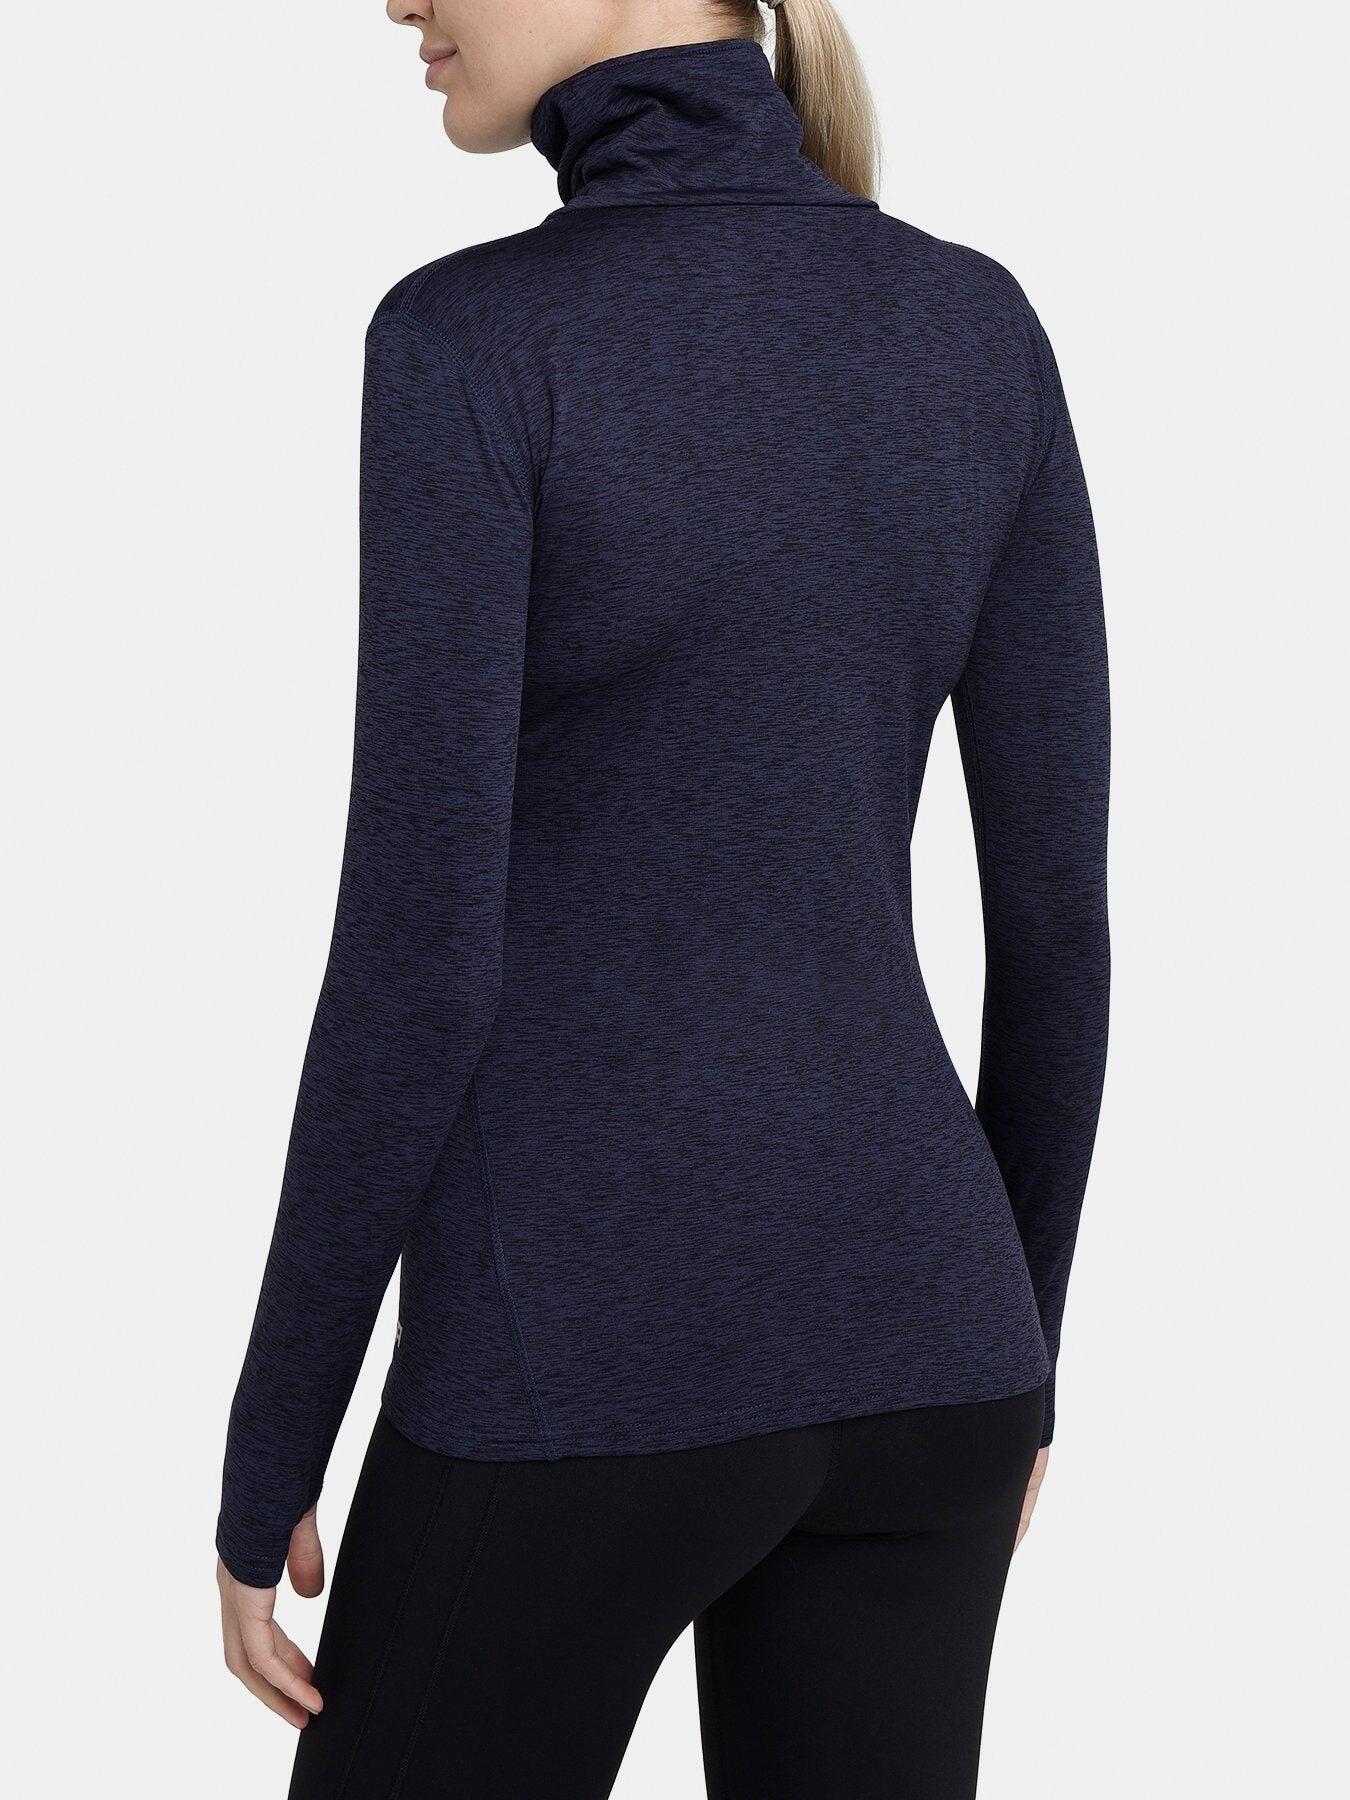 Women's Thermal Funnel Neck Top - Night Sky 2/5